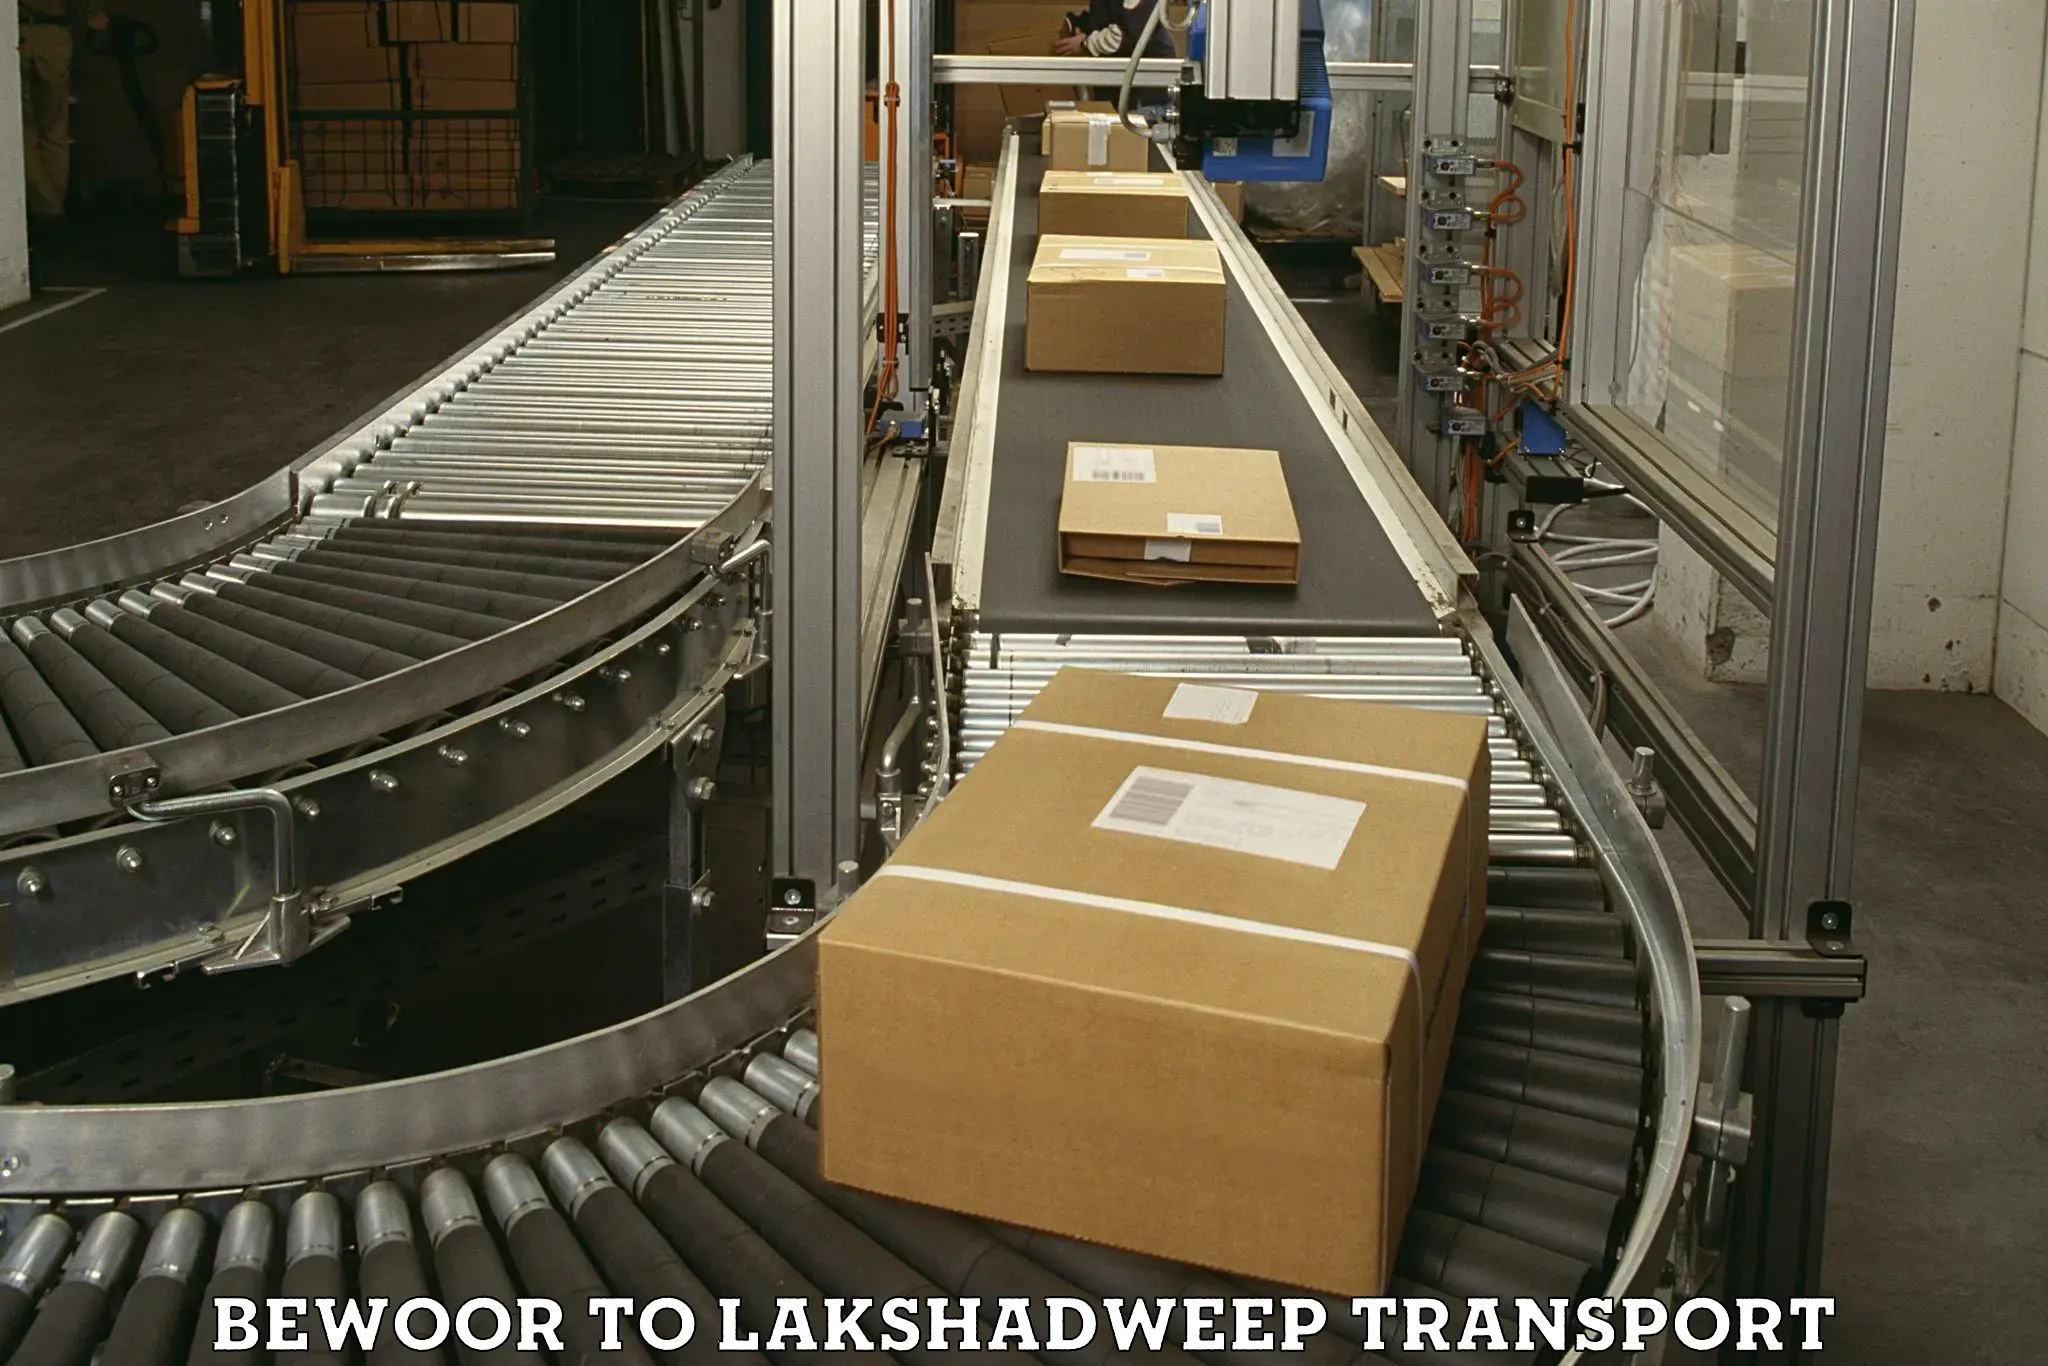 Container transport service Bewoor to Lakshadweep